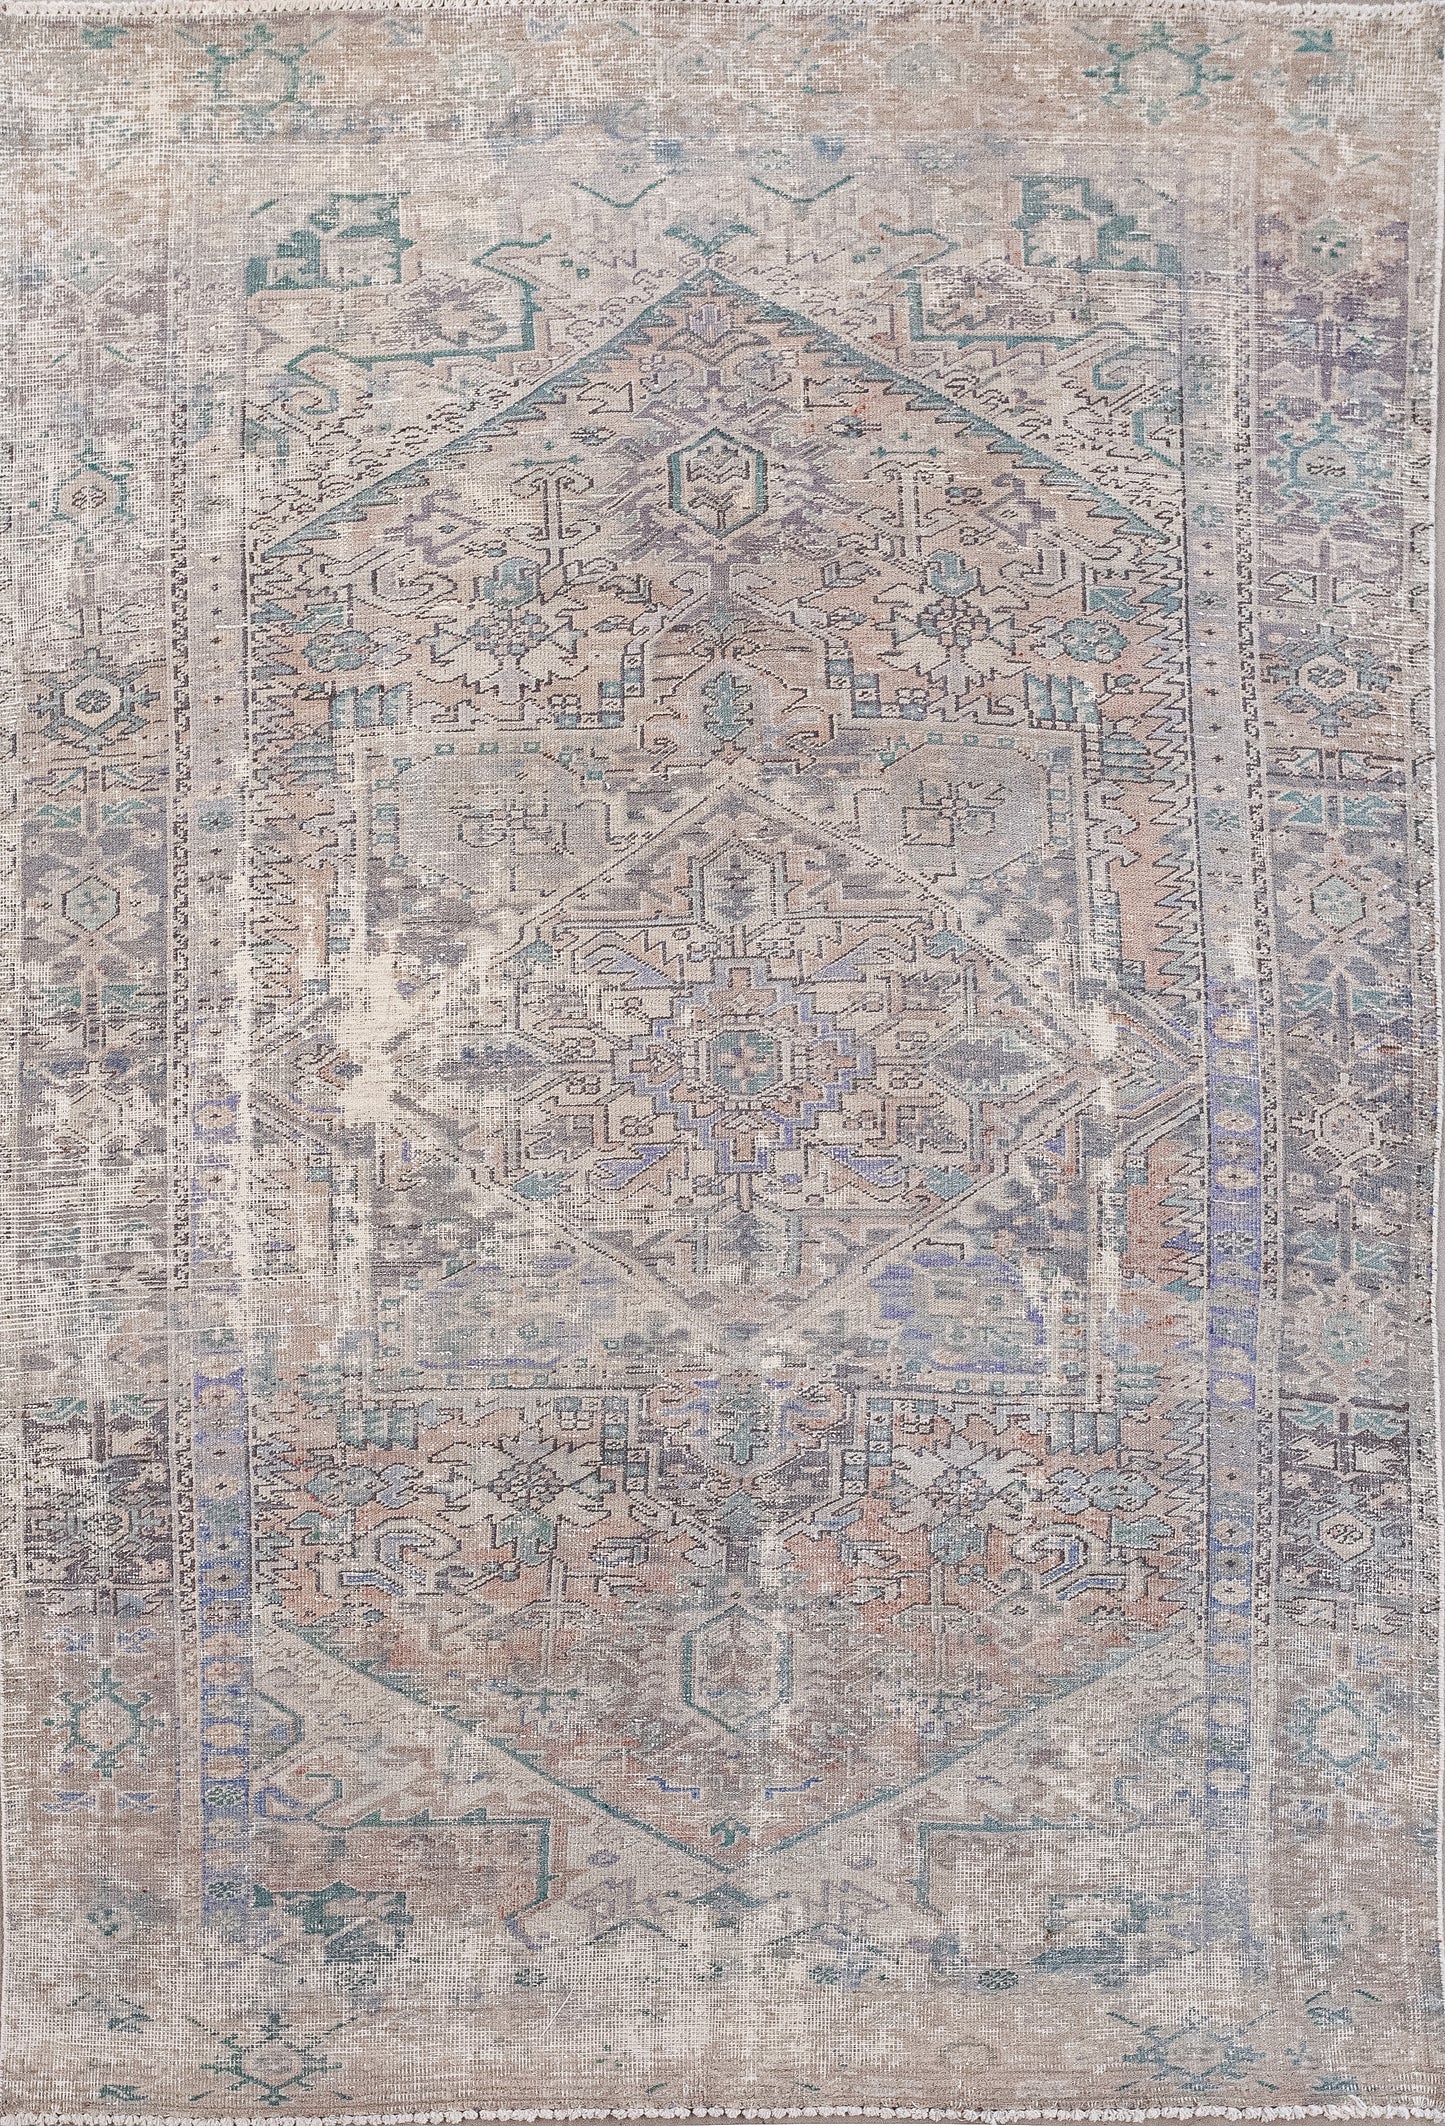 This astonishing pyramidal carpet was woven to project a mural. The color scheme has varying shades of brown, black outline, and green, purple, and blue accents.